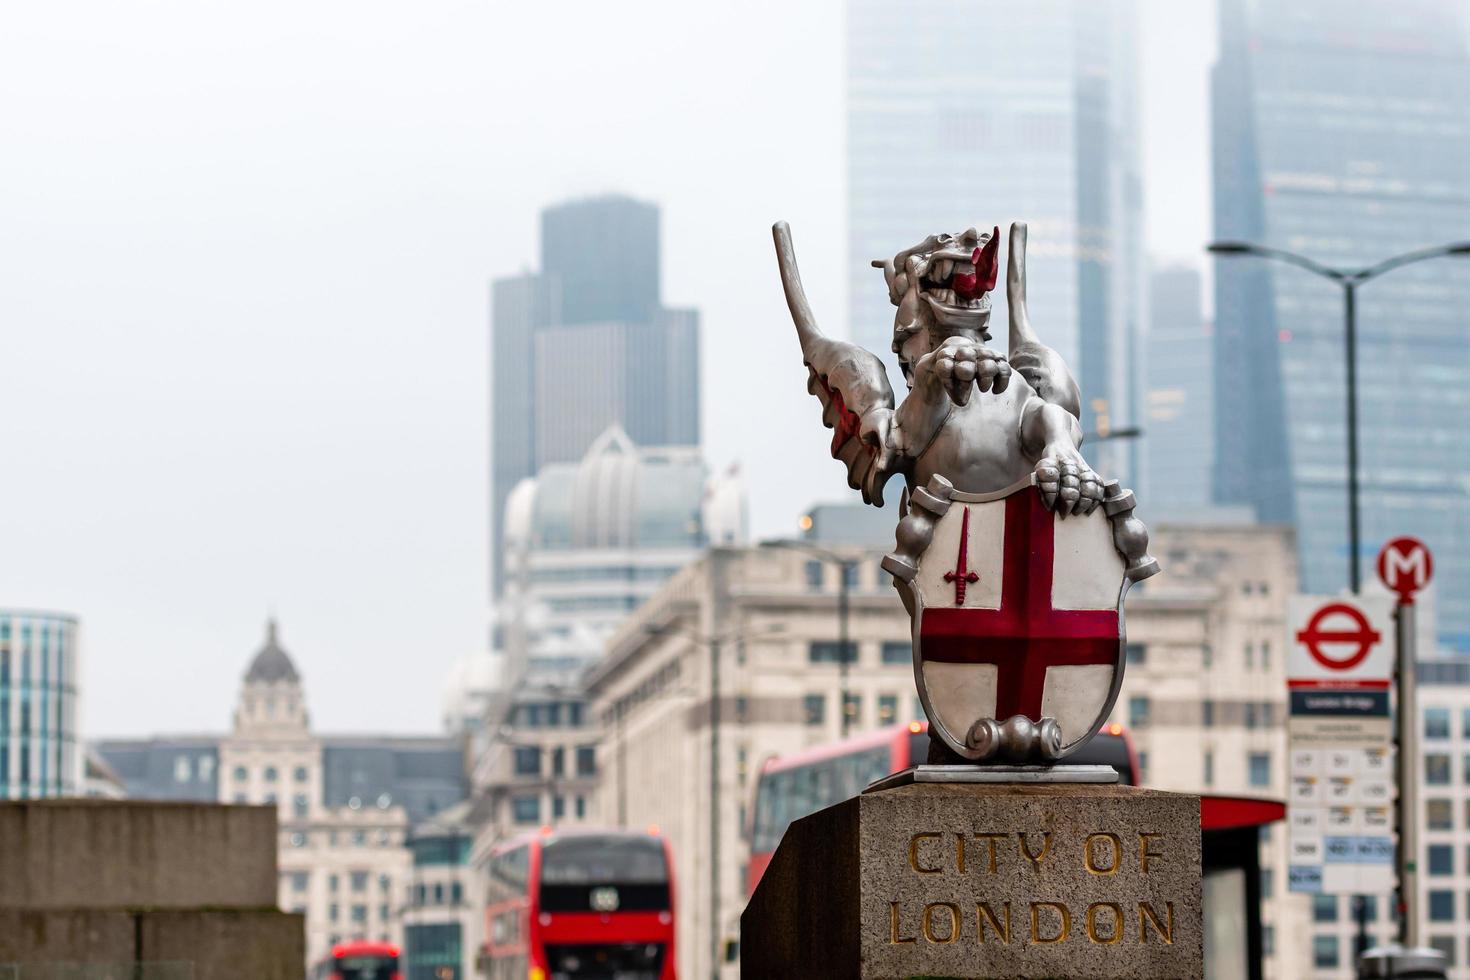 A dragon sculpture with the Coat of Arms of the City of London at the London Bridge. Blurred skyscrapers and red double decker buses in the background. photo